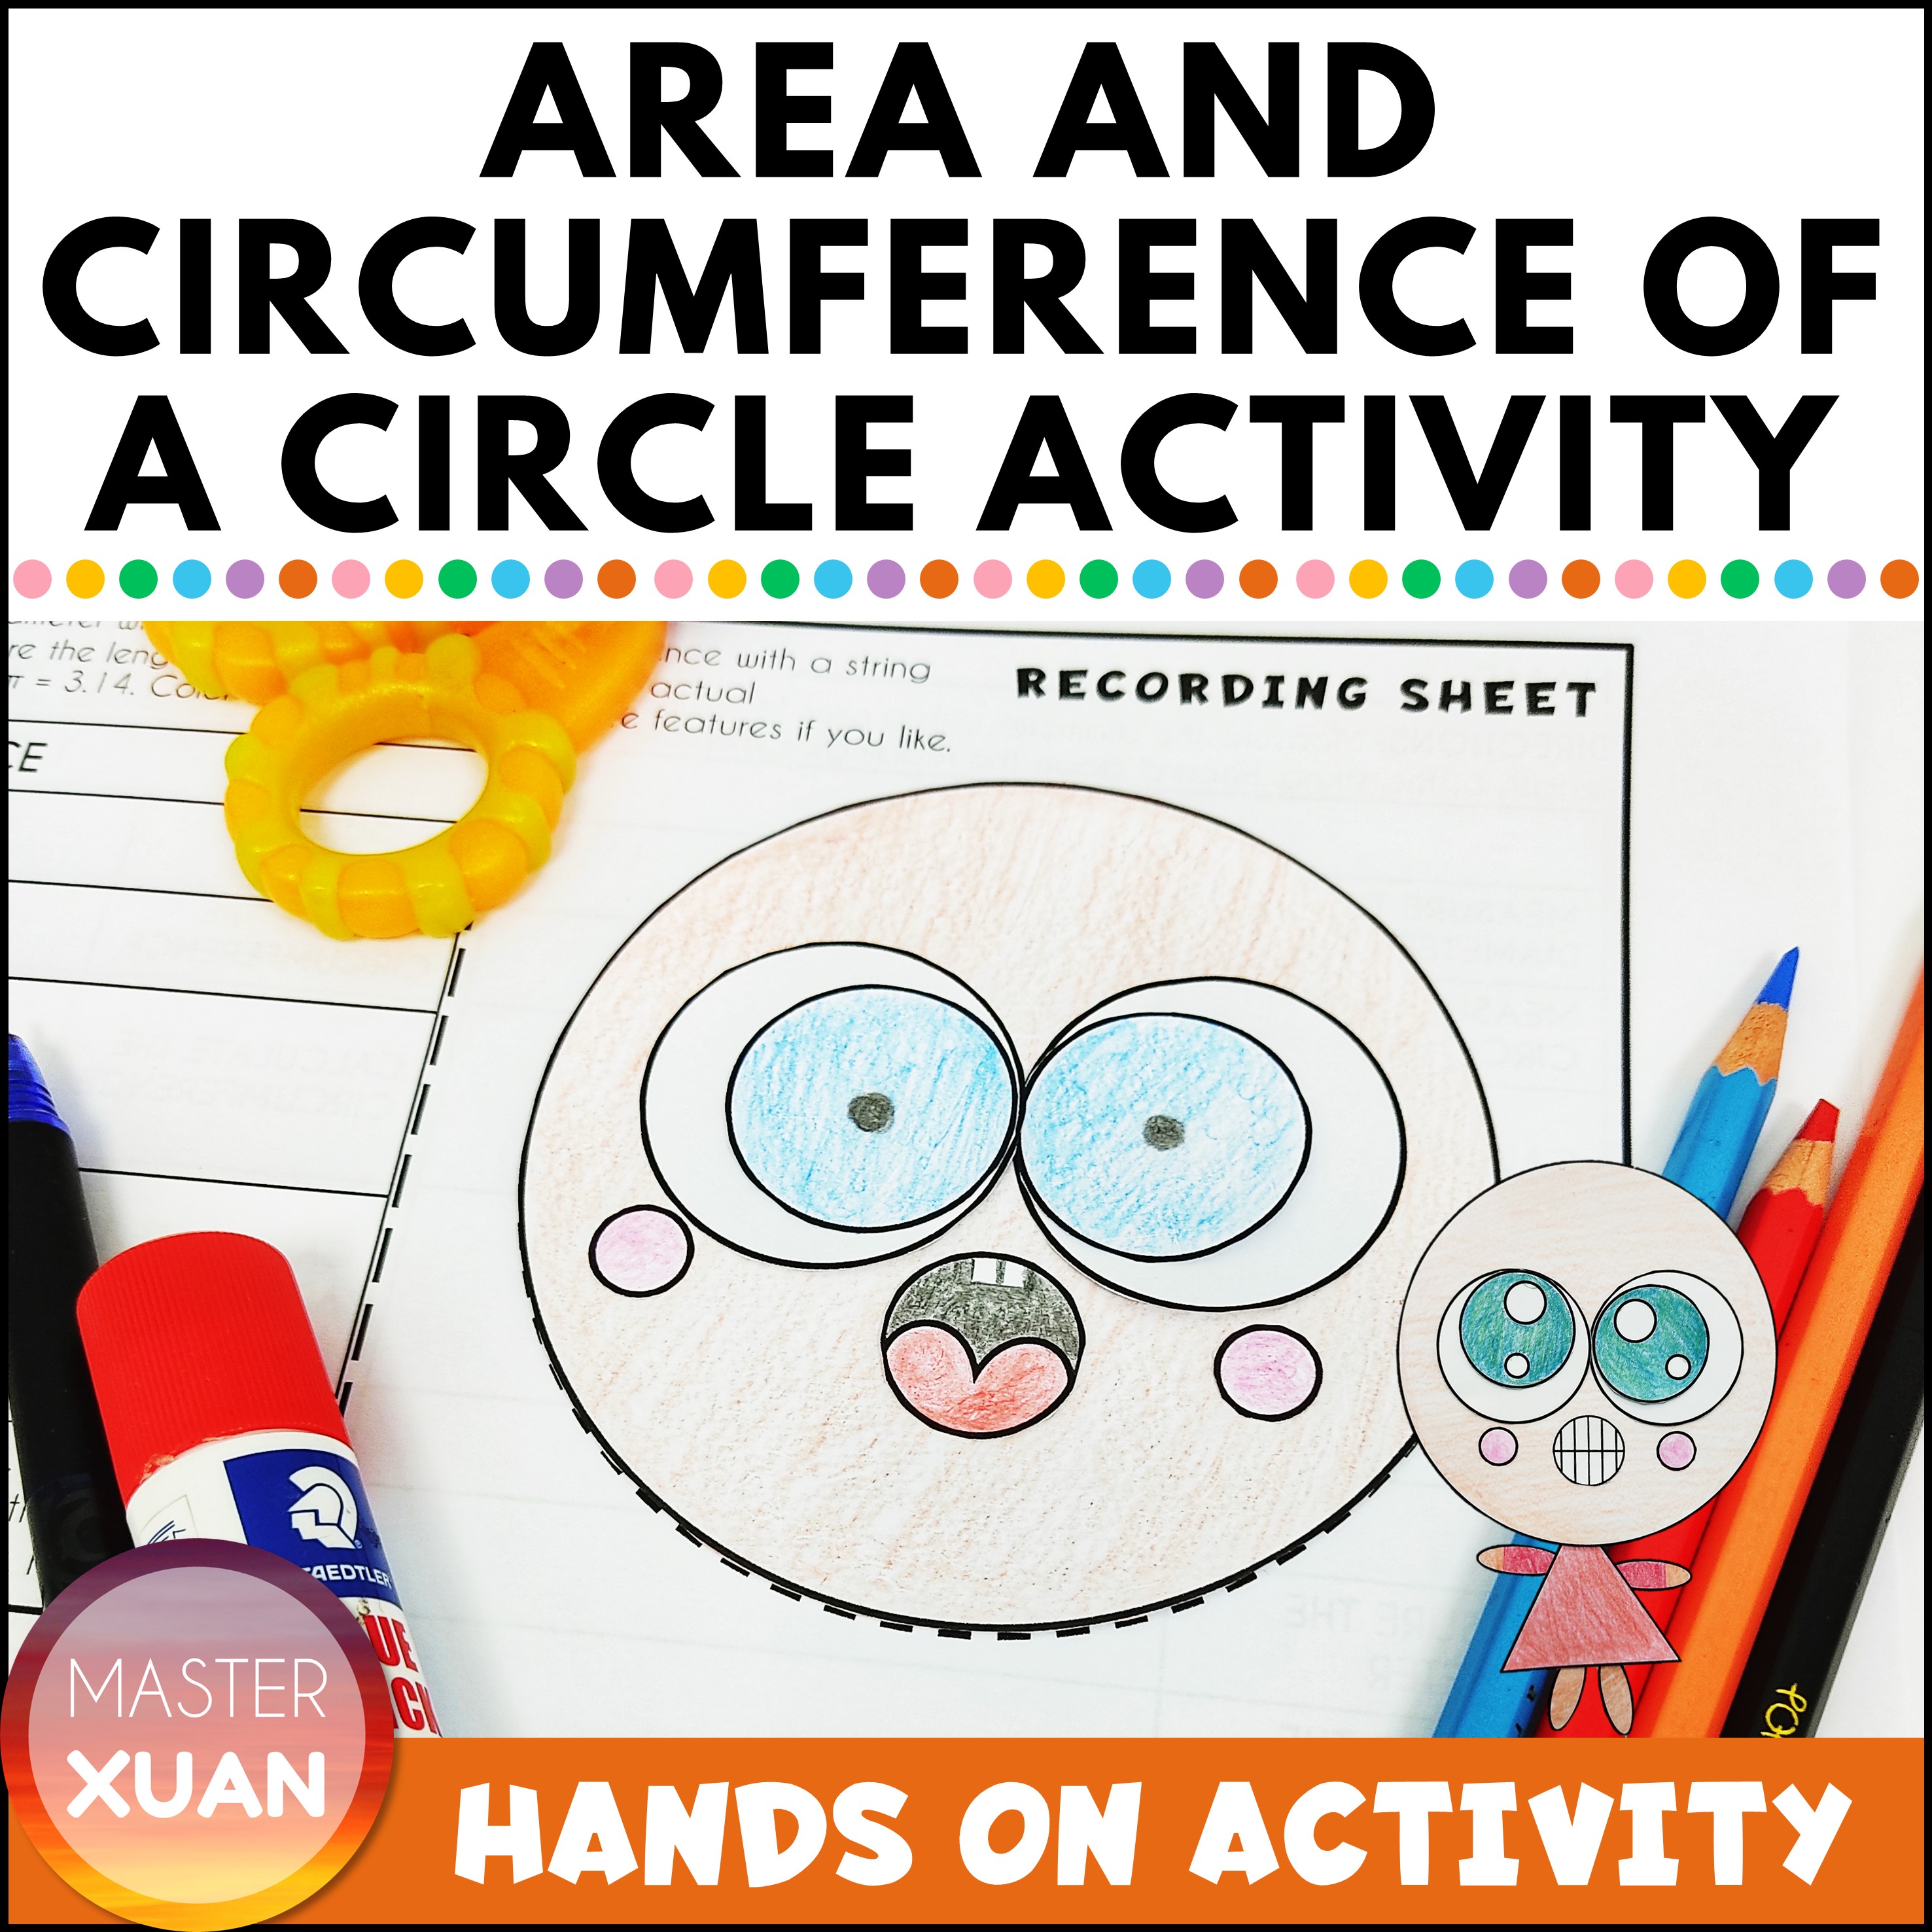 have fun with area and circumference of a circle activity